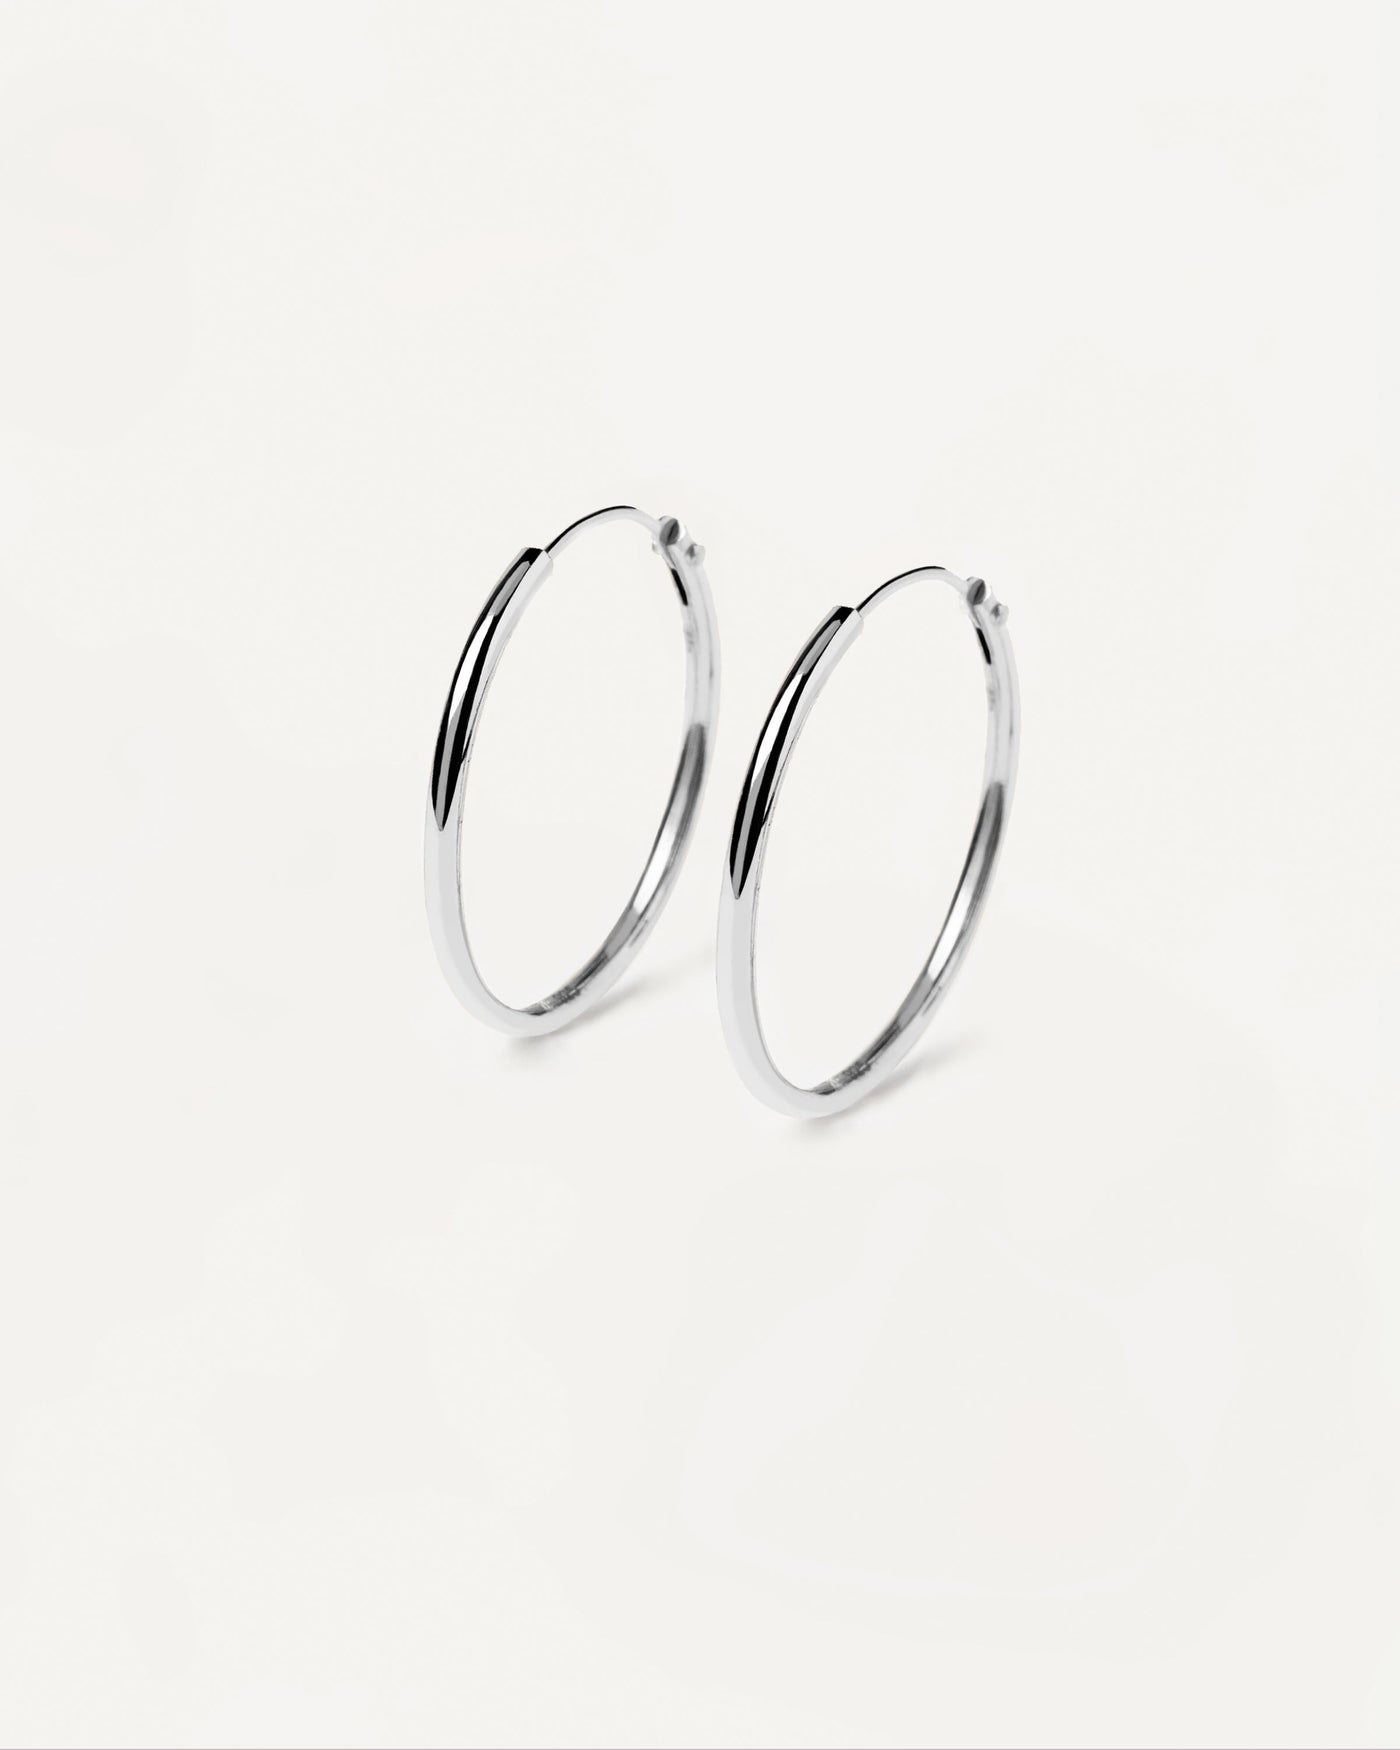 2023 Selection | Medium Hoops Silver. Classic round endless hoop earrings in 925 sterling silver. Get the latest arrival from PDPAOLA. Place your order safely and get this Best Seller. Free Shipping.